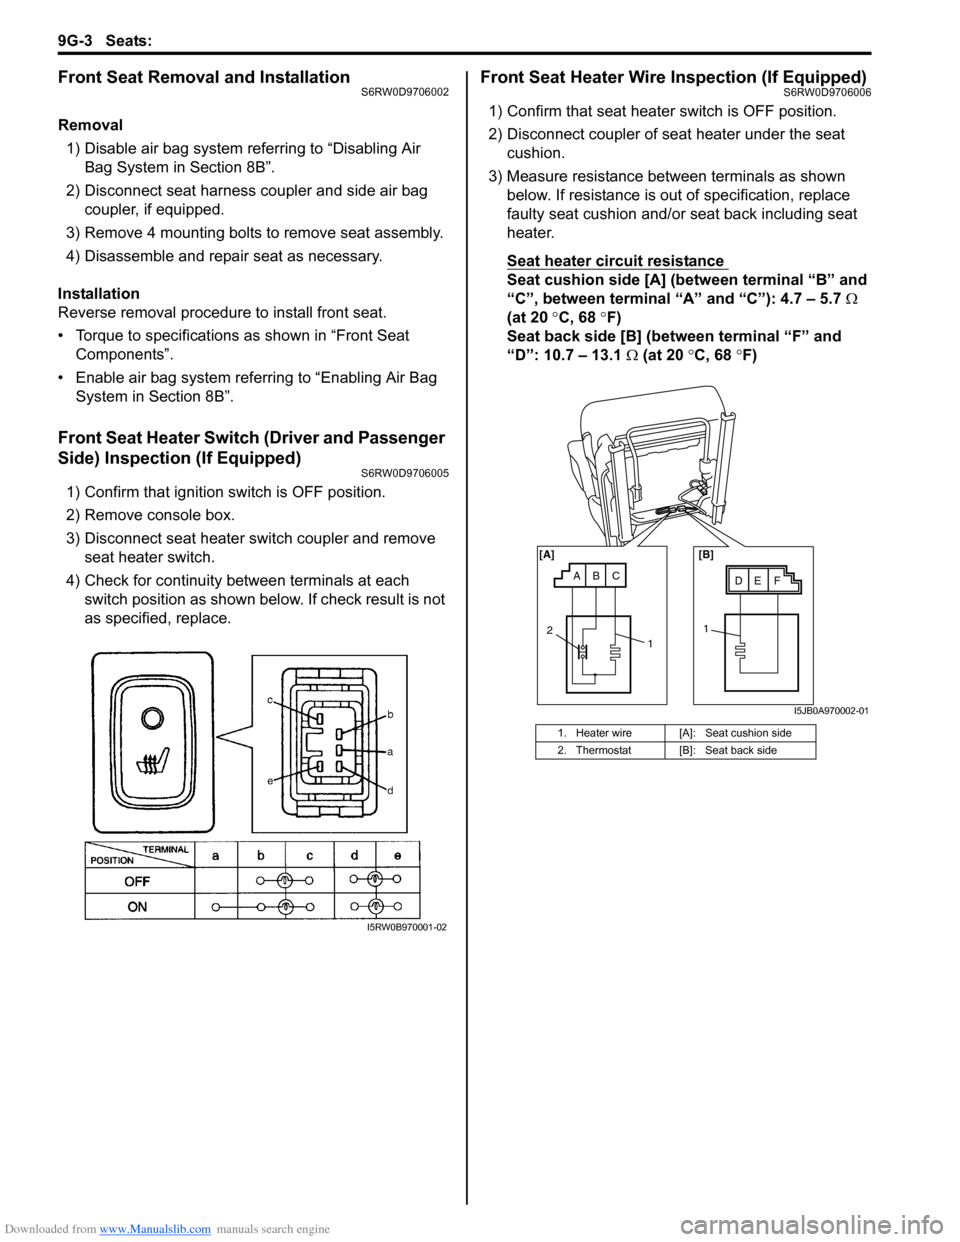 SUZUKI SX4 2006 1.G Service Workshop Manual Downloaded from www.Manualslib.com manuals search engine 9G-3 Seats: 
Front Seat Removal and InstallationS6RW0D9706002
Removal
1) Disable air bag system referring to “Disabling Air 
Bag System in Se